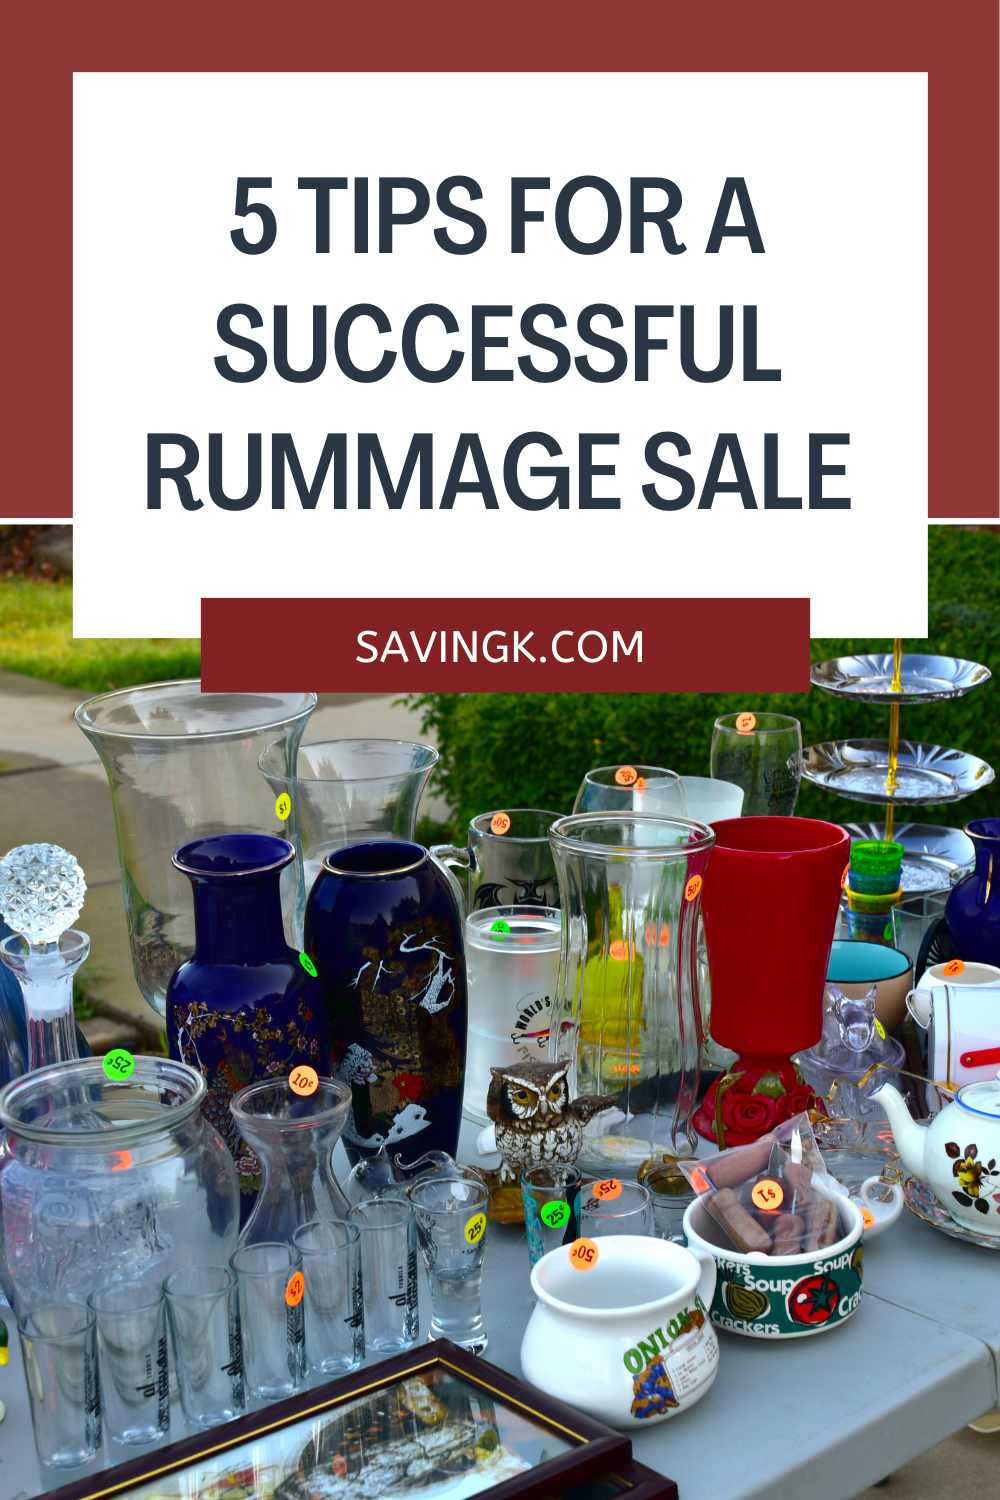 5 Tips For A Successful Rummage Sale